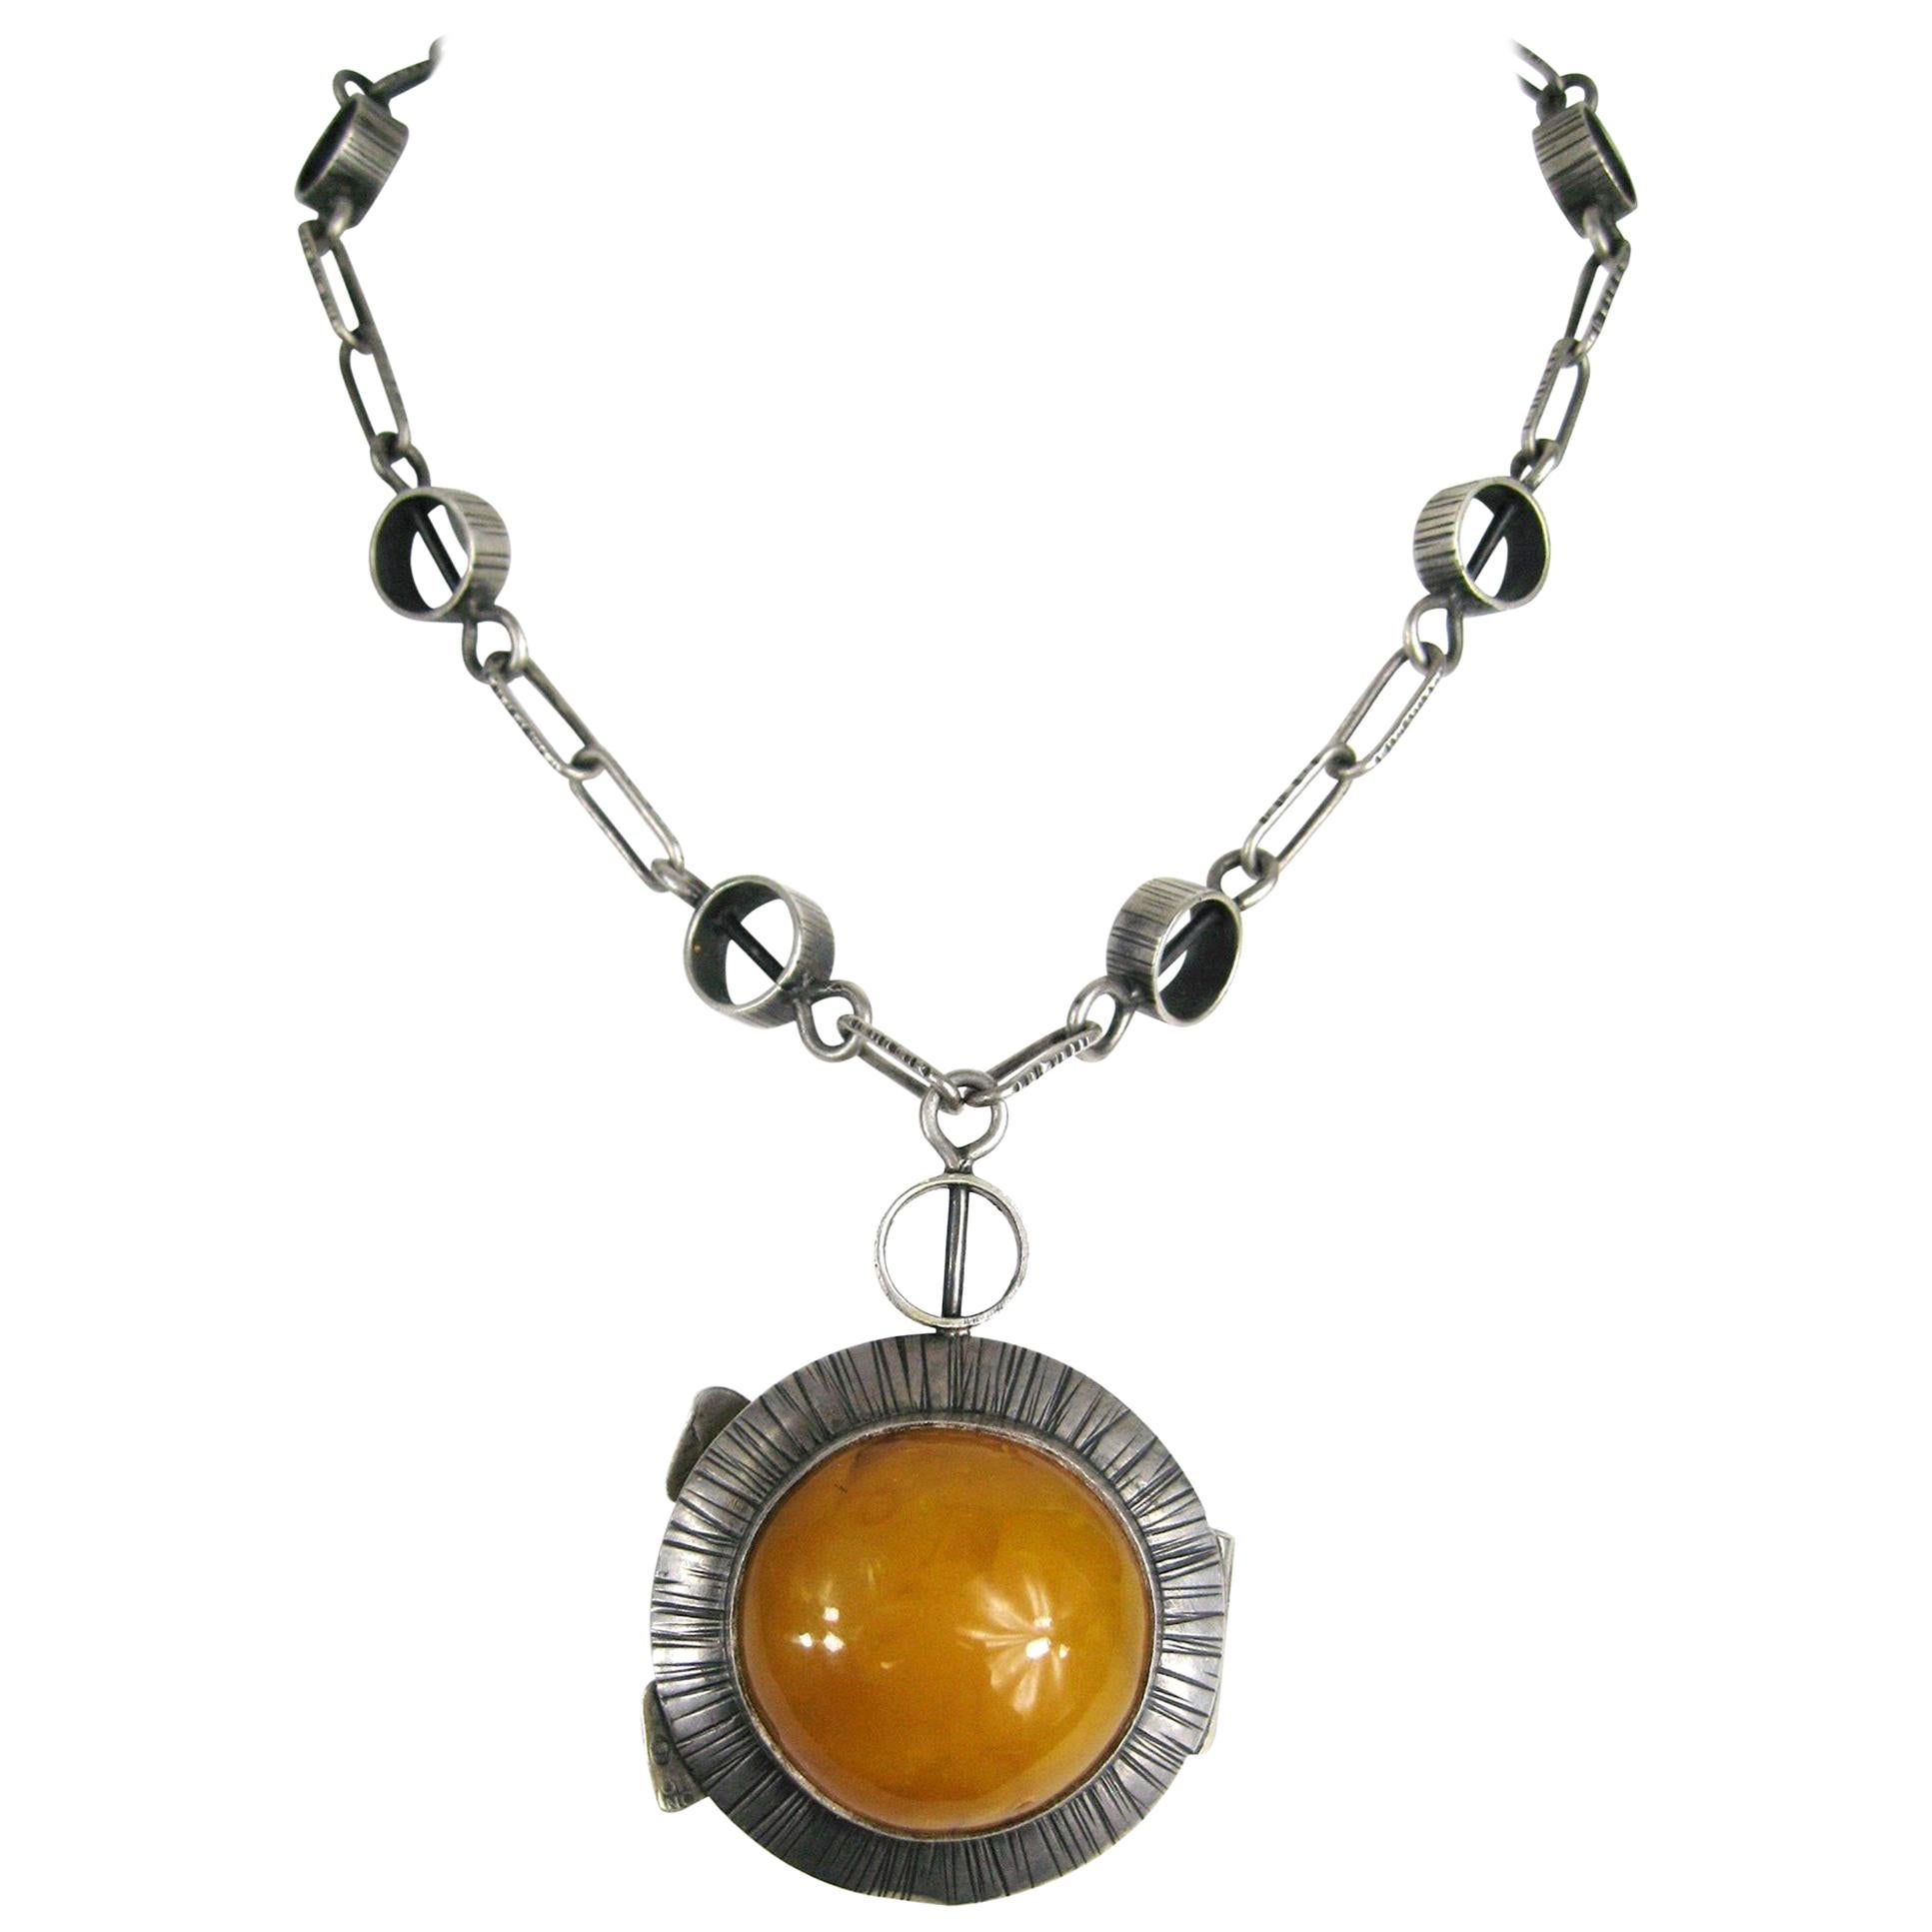  Sterling Silver Amber Locket Pendant Necklace 